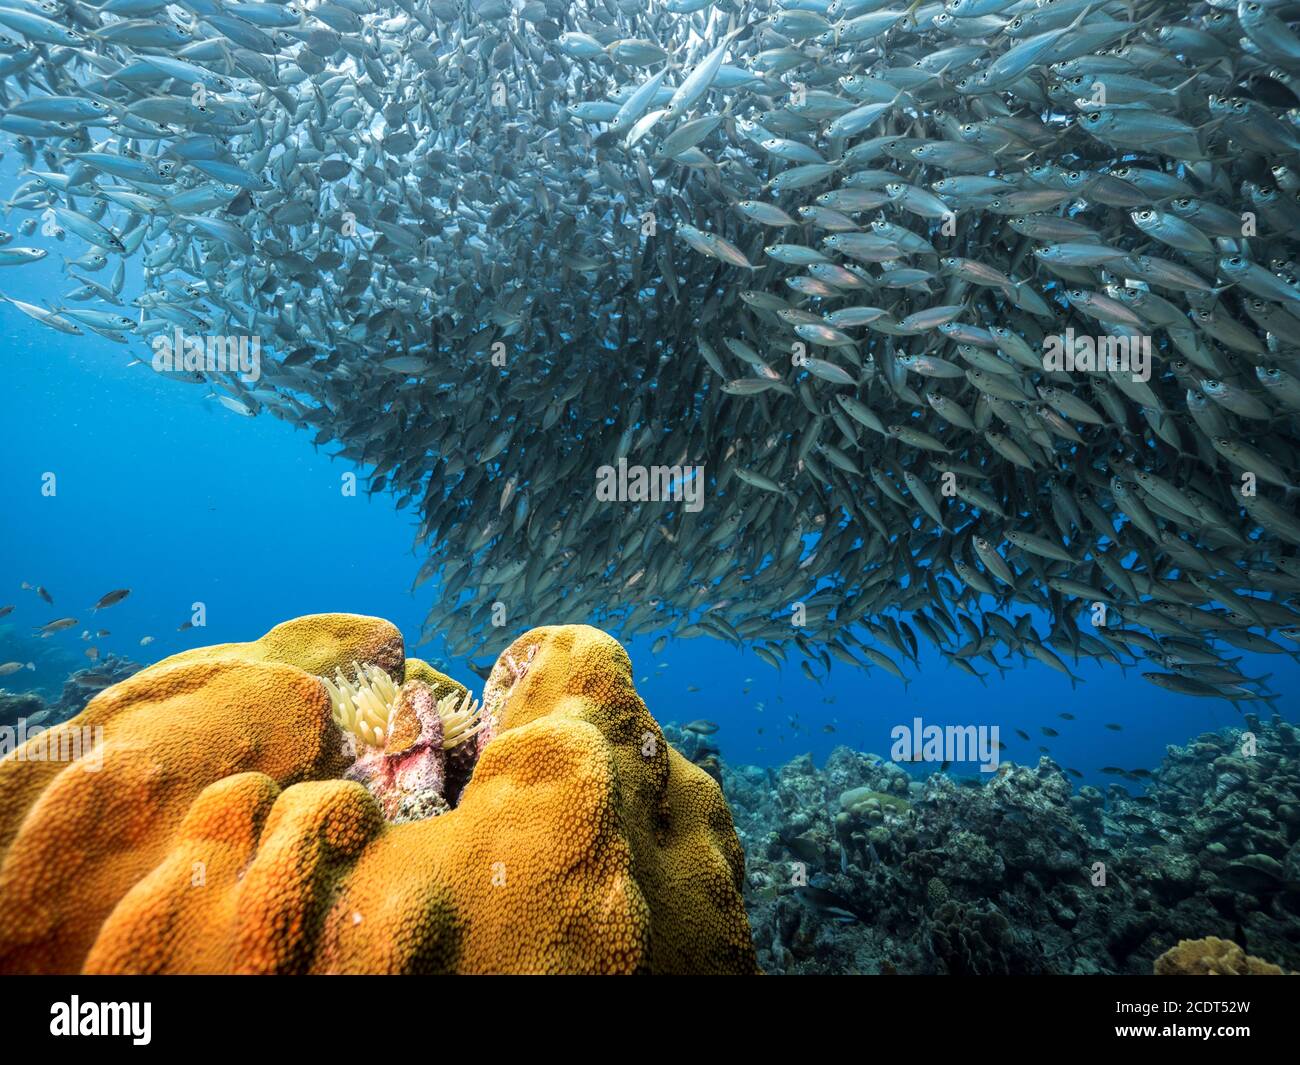 Bait ball / school of fish in turquoise water of coral reef in Caribbean Sea / Curacao with Sea Anemone Stock Photo